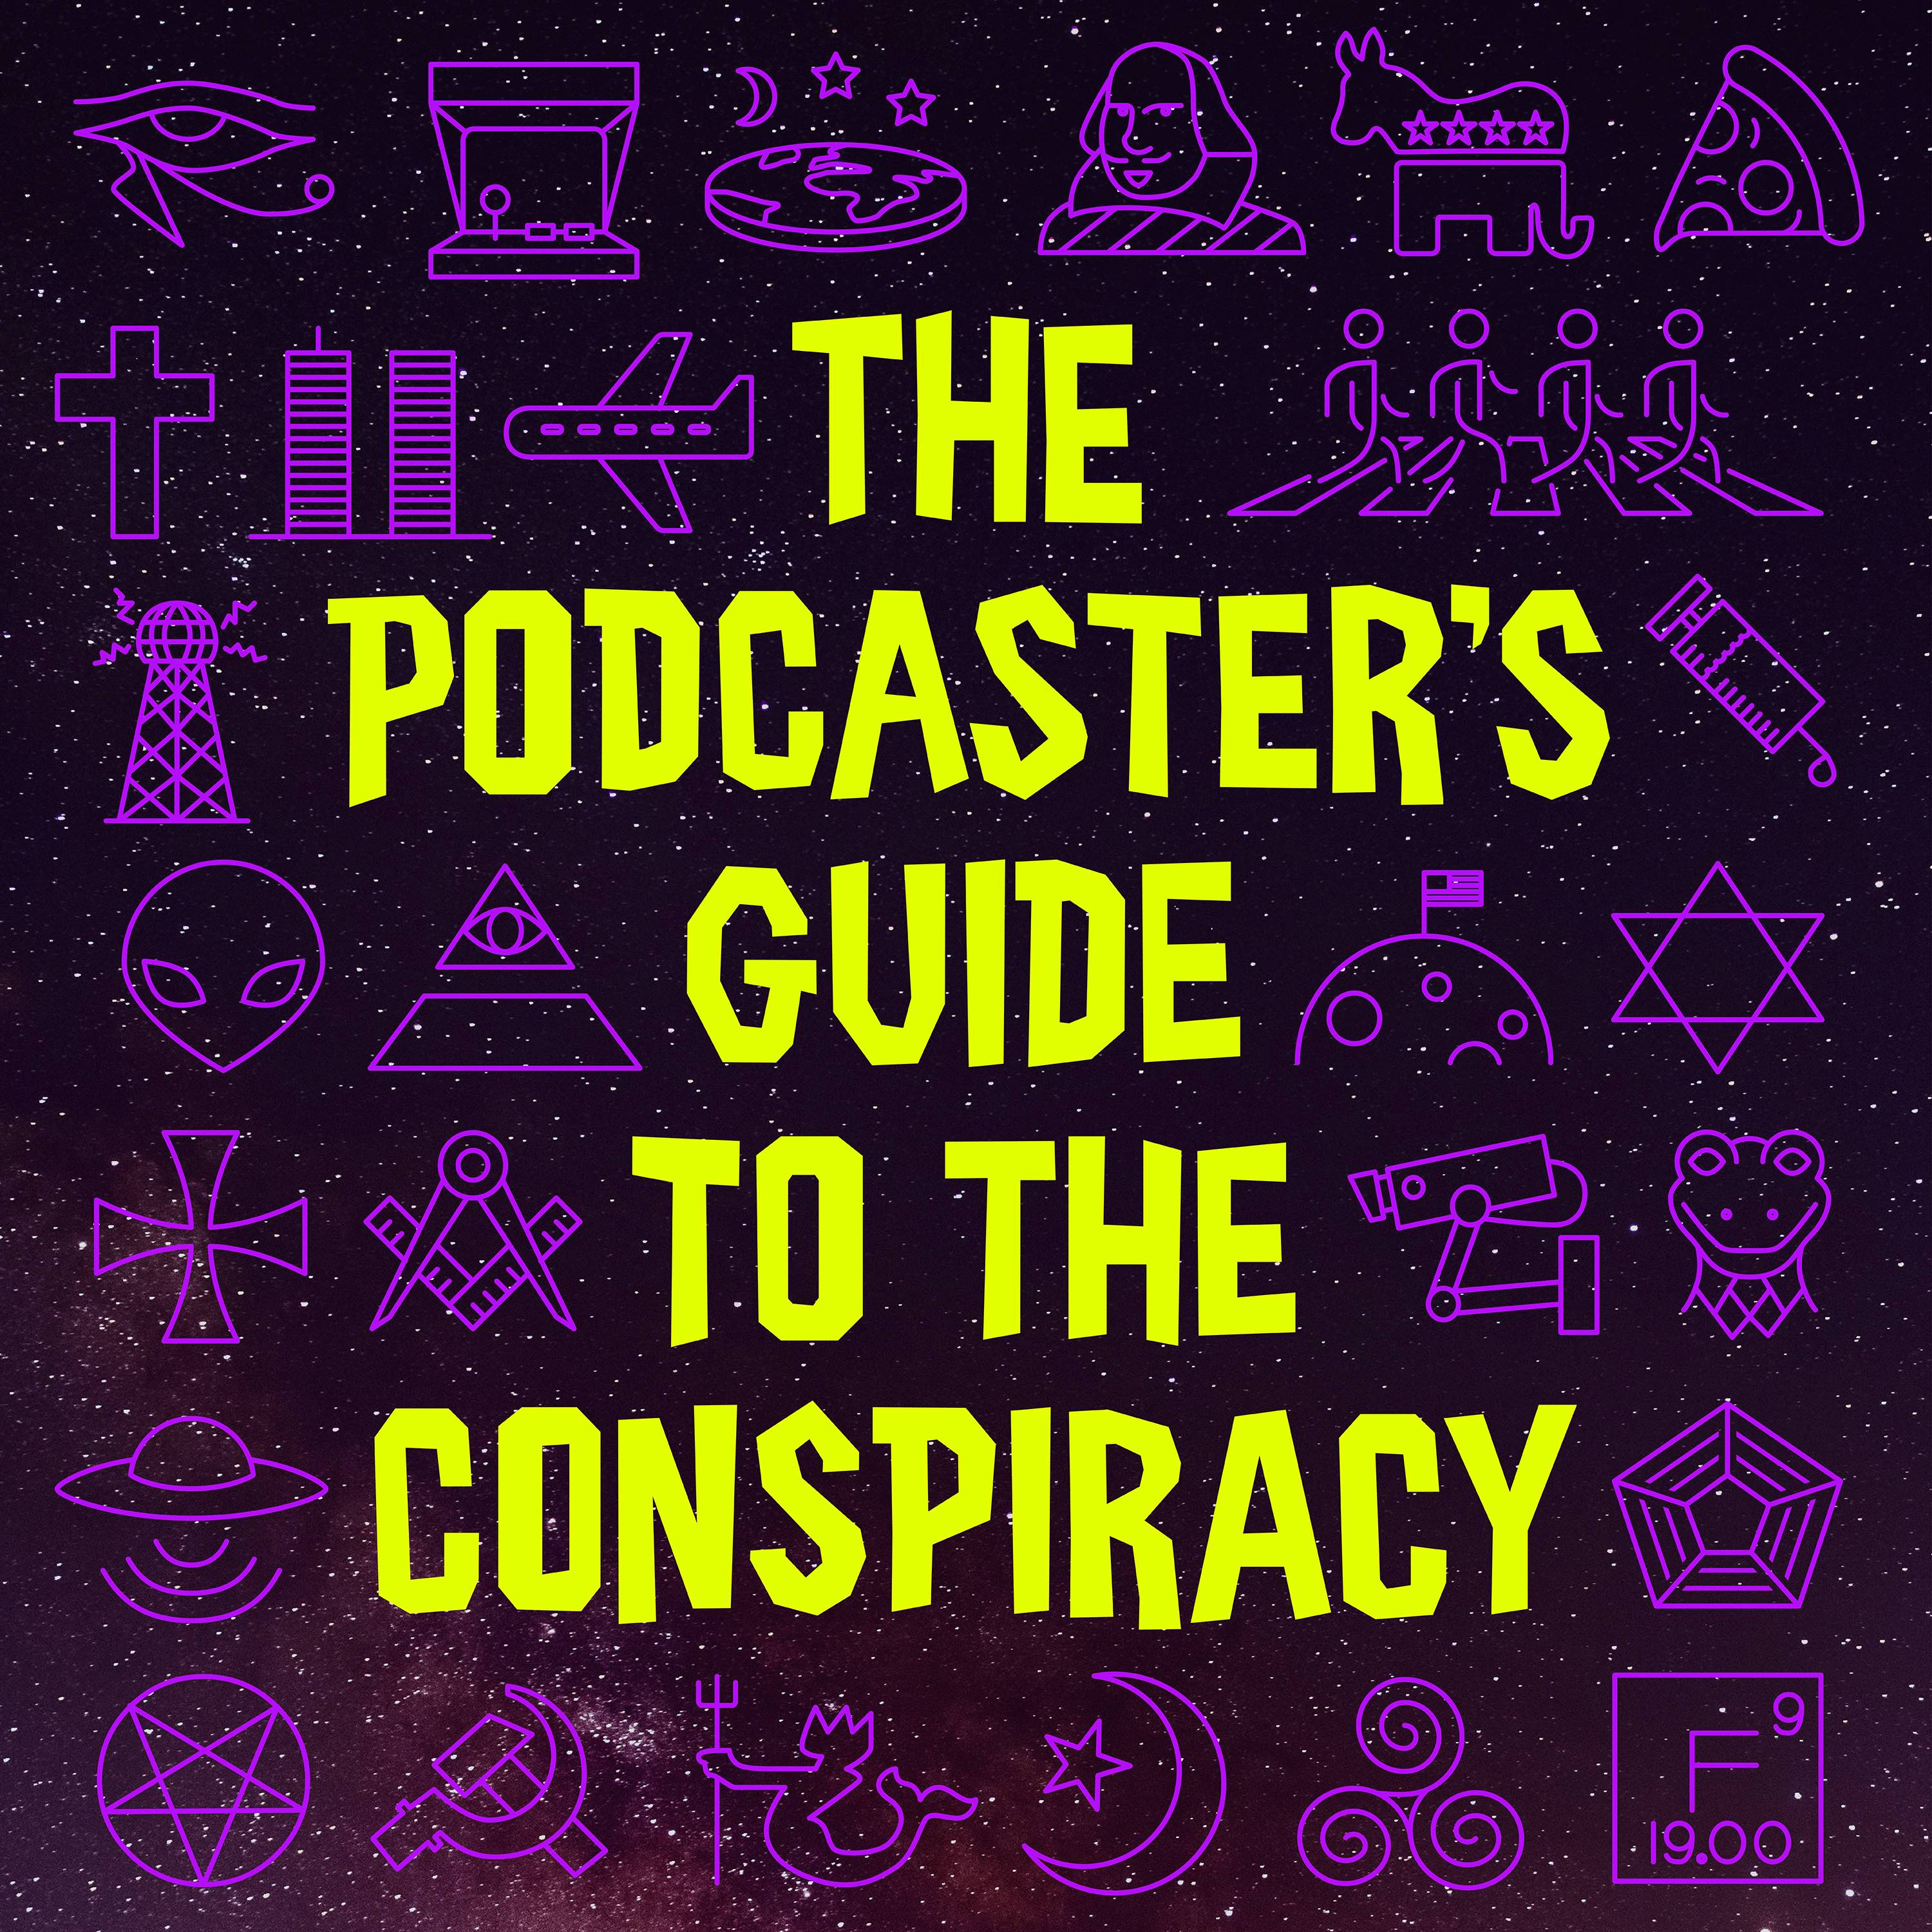 The Podcaster’s Guide to the Conspiracy